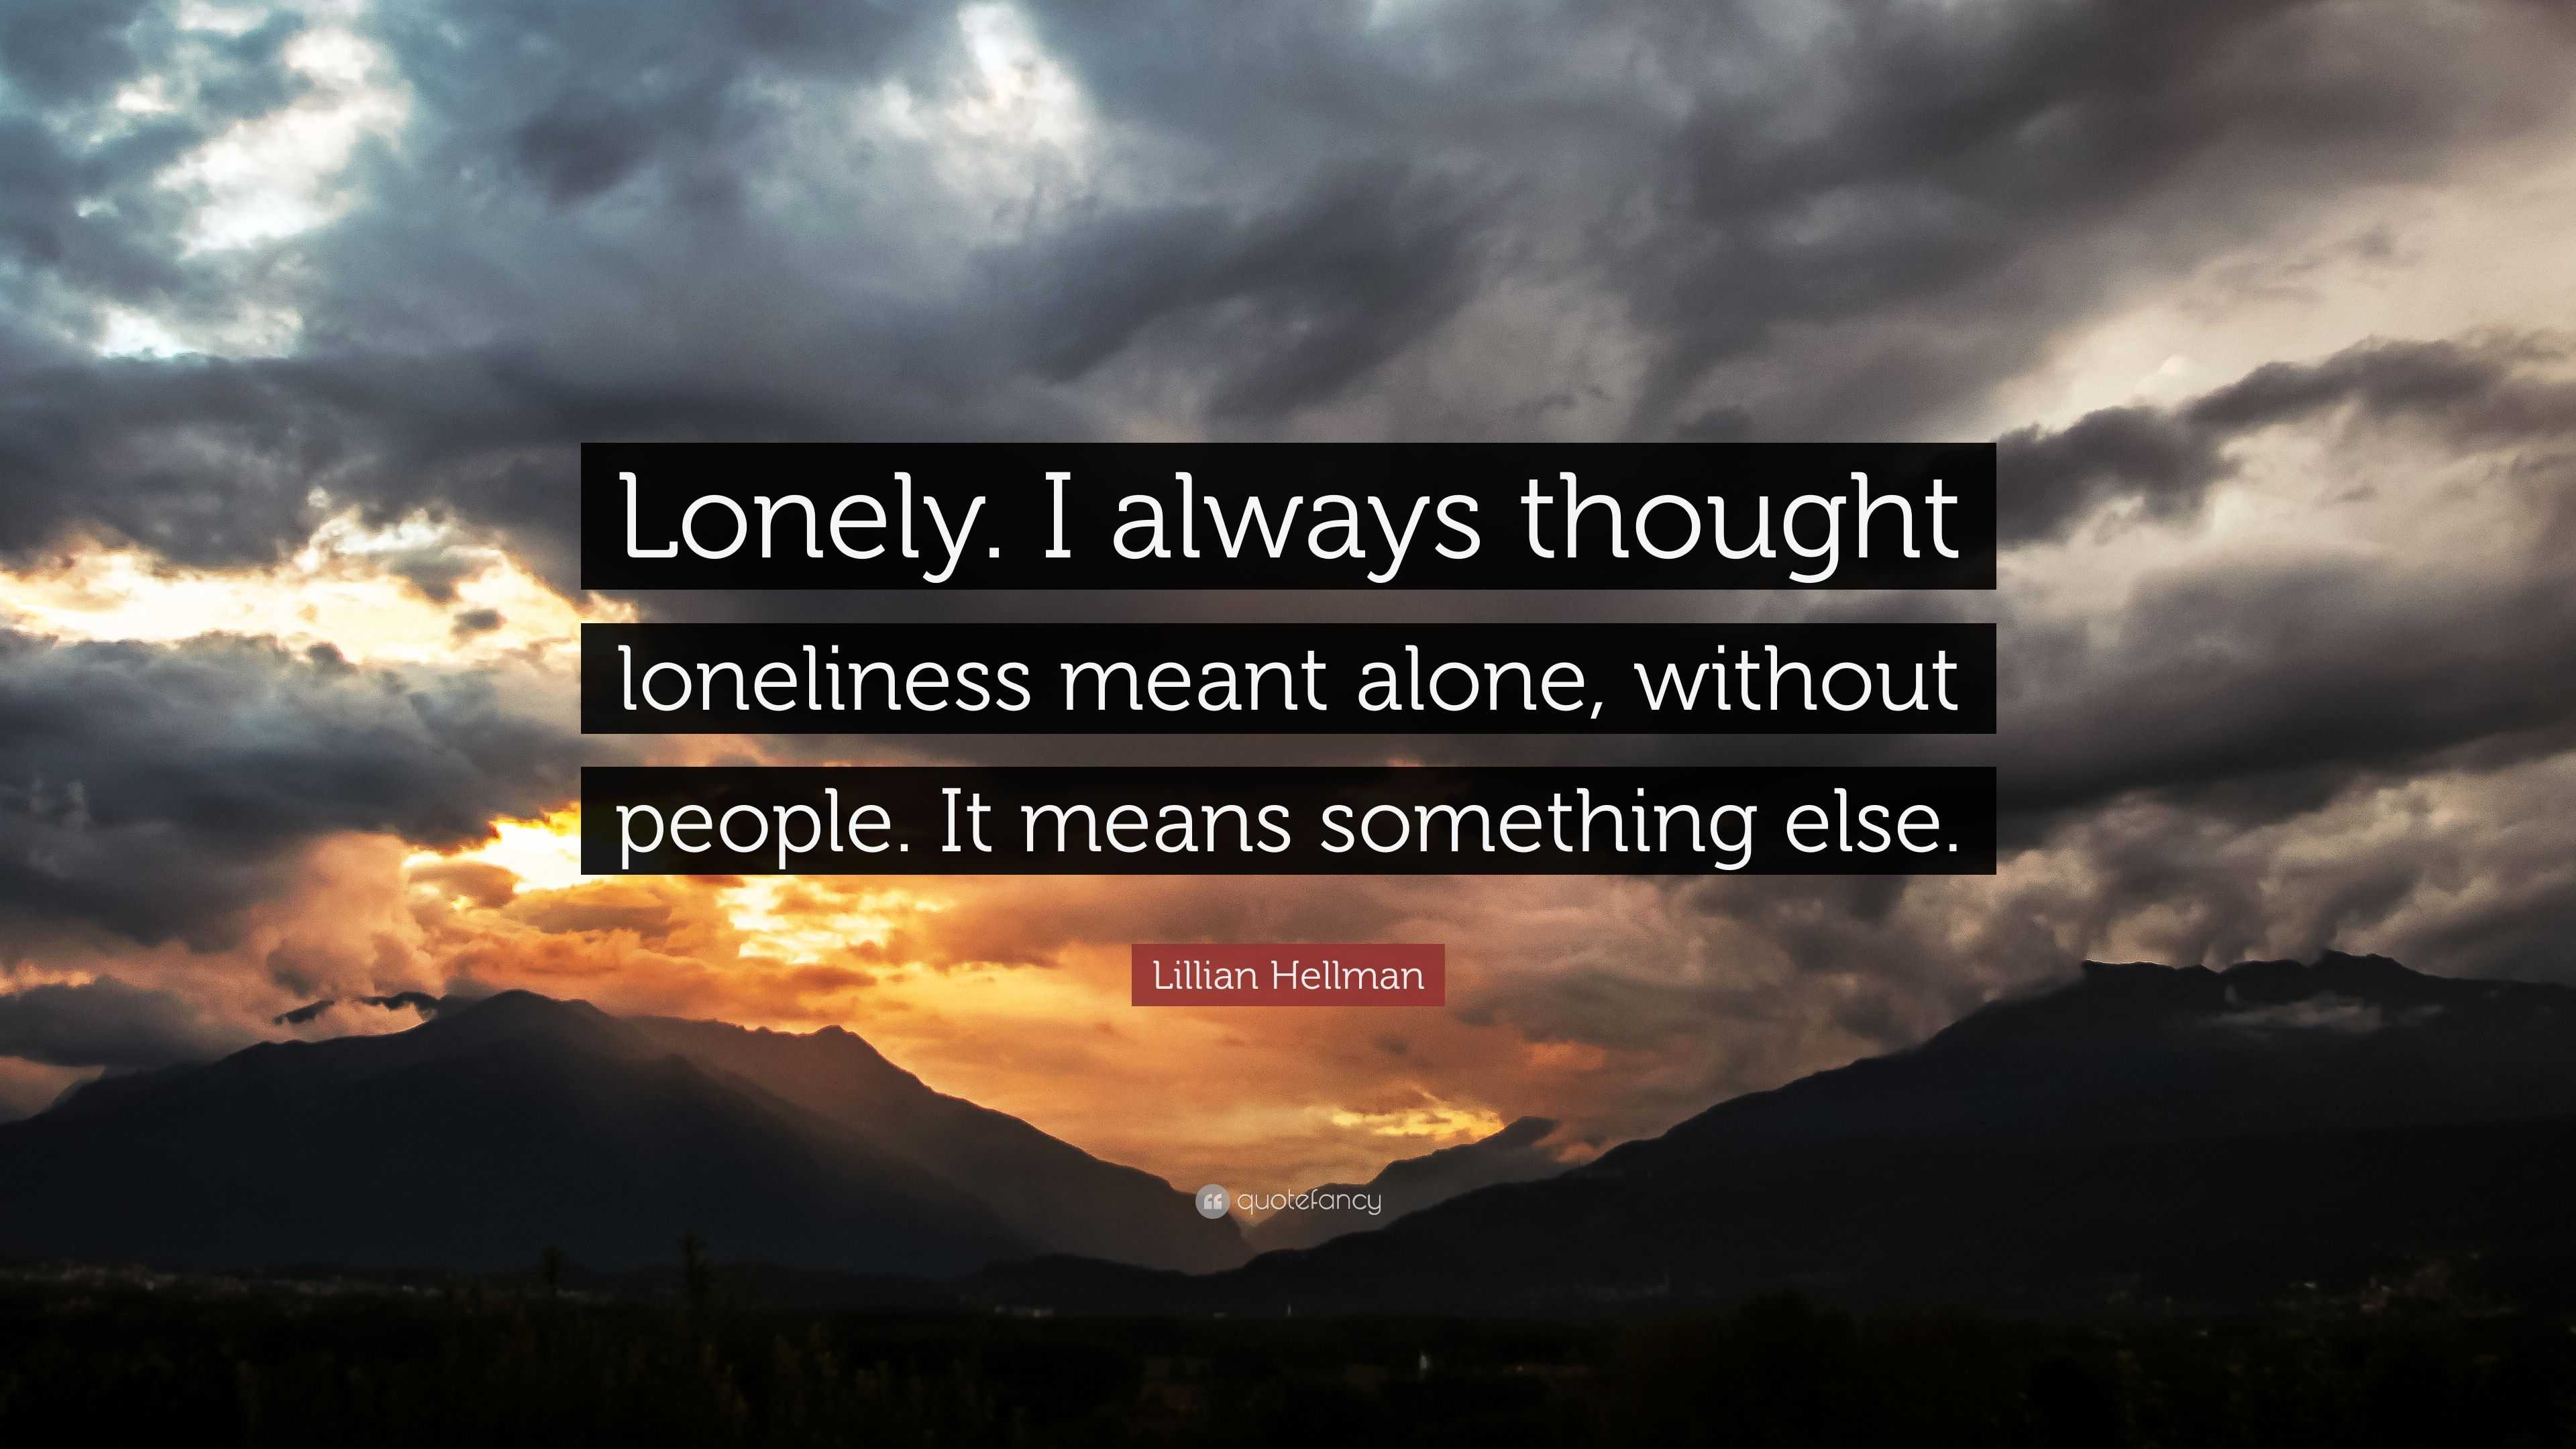 Lillian Hellman Quote: “Lonely. I Always Thought Loneliness Meant Alone